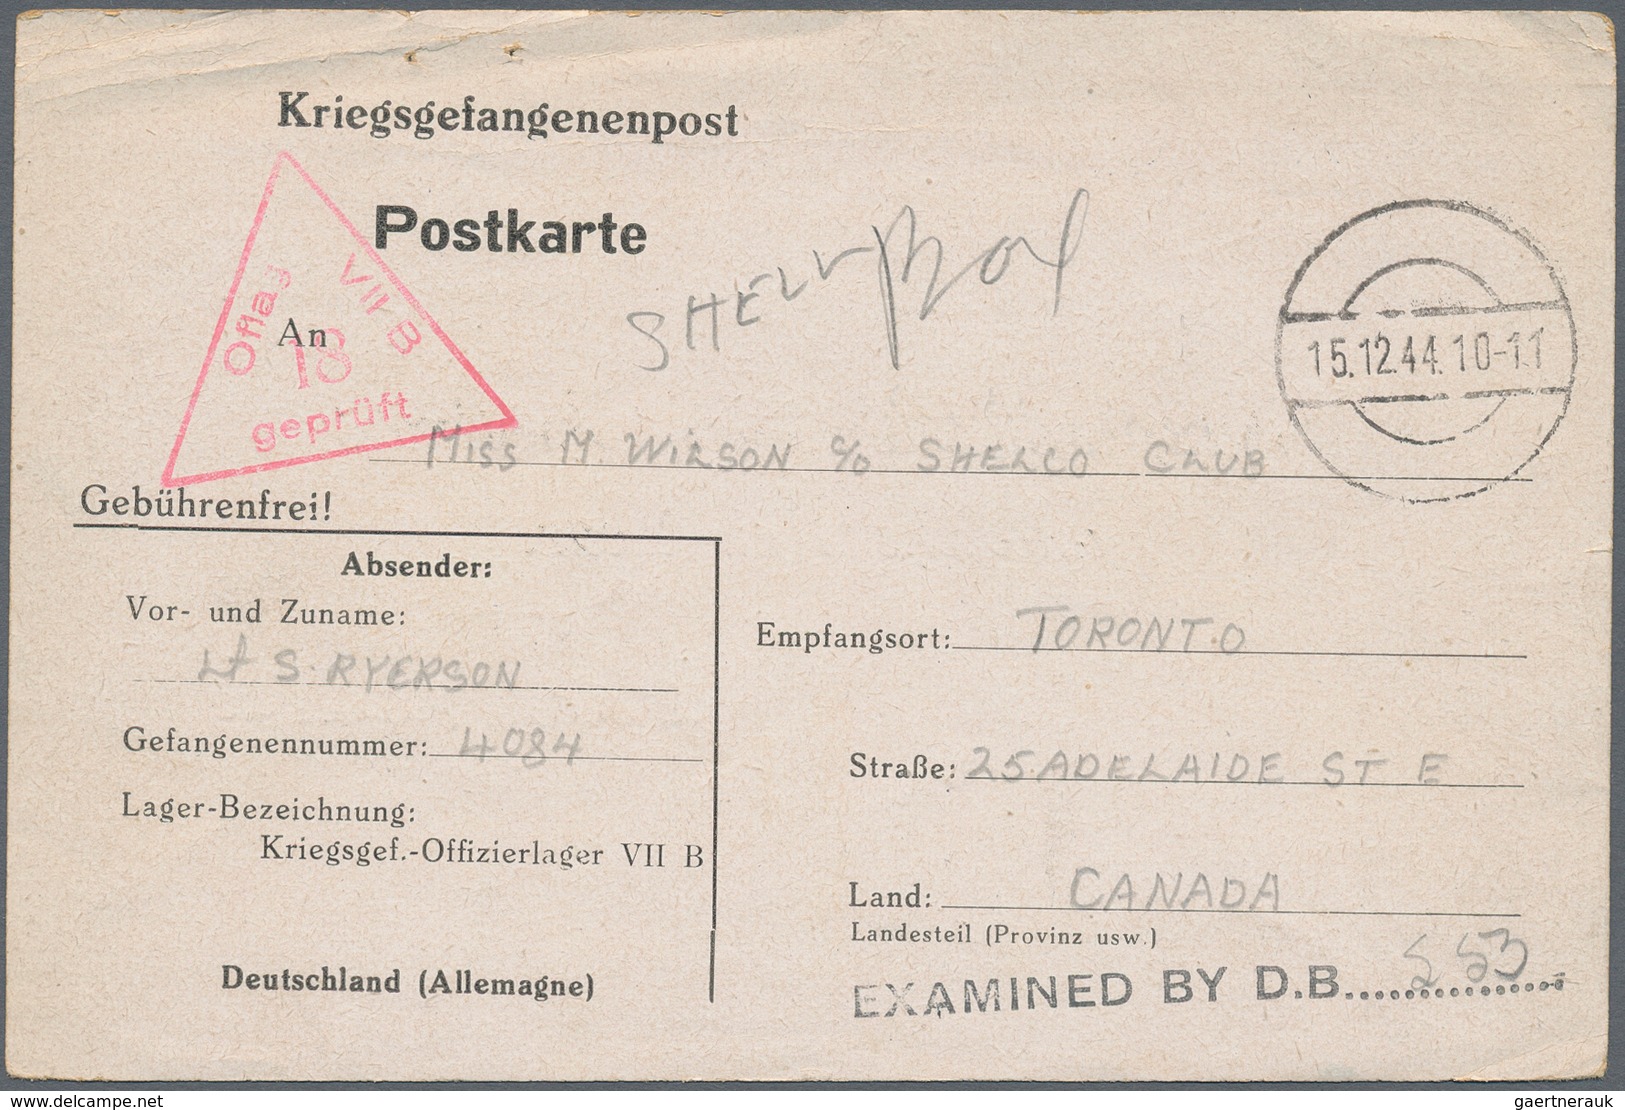 Kanada: 1941/54 (ca.) holding of about 670 letters and cards of prisoners of war and the field post,